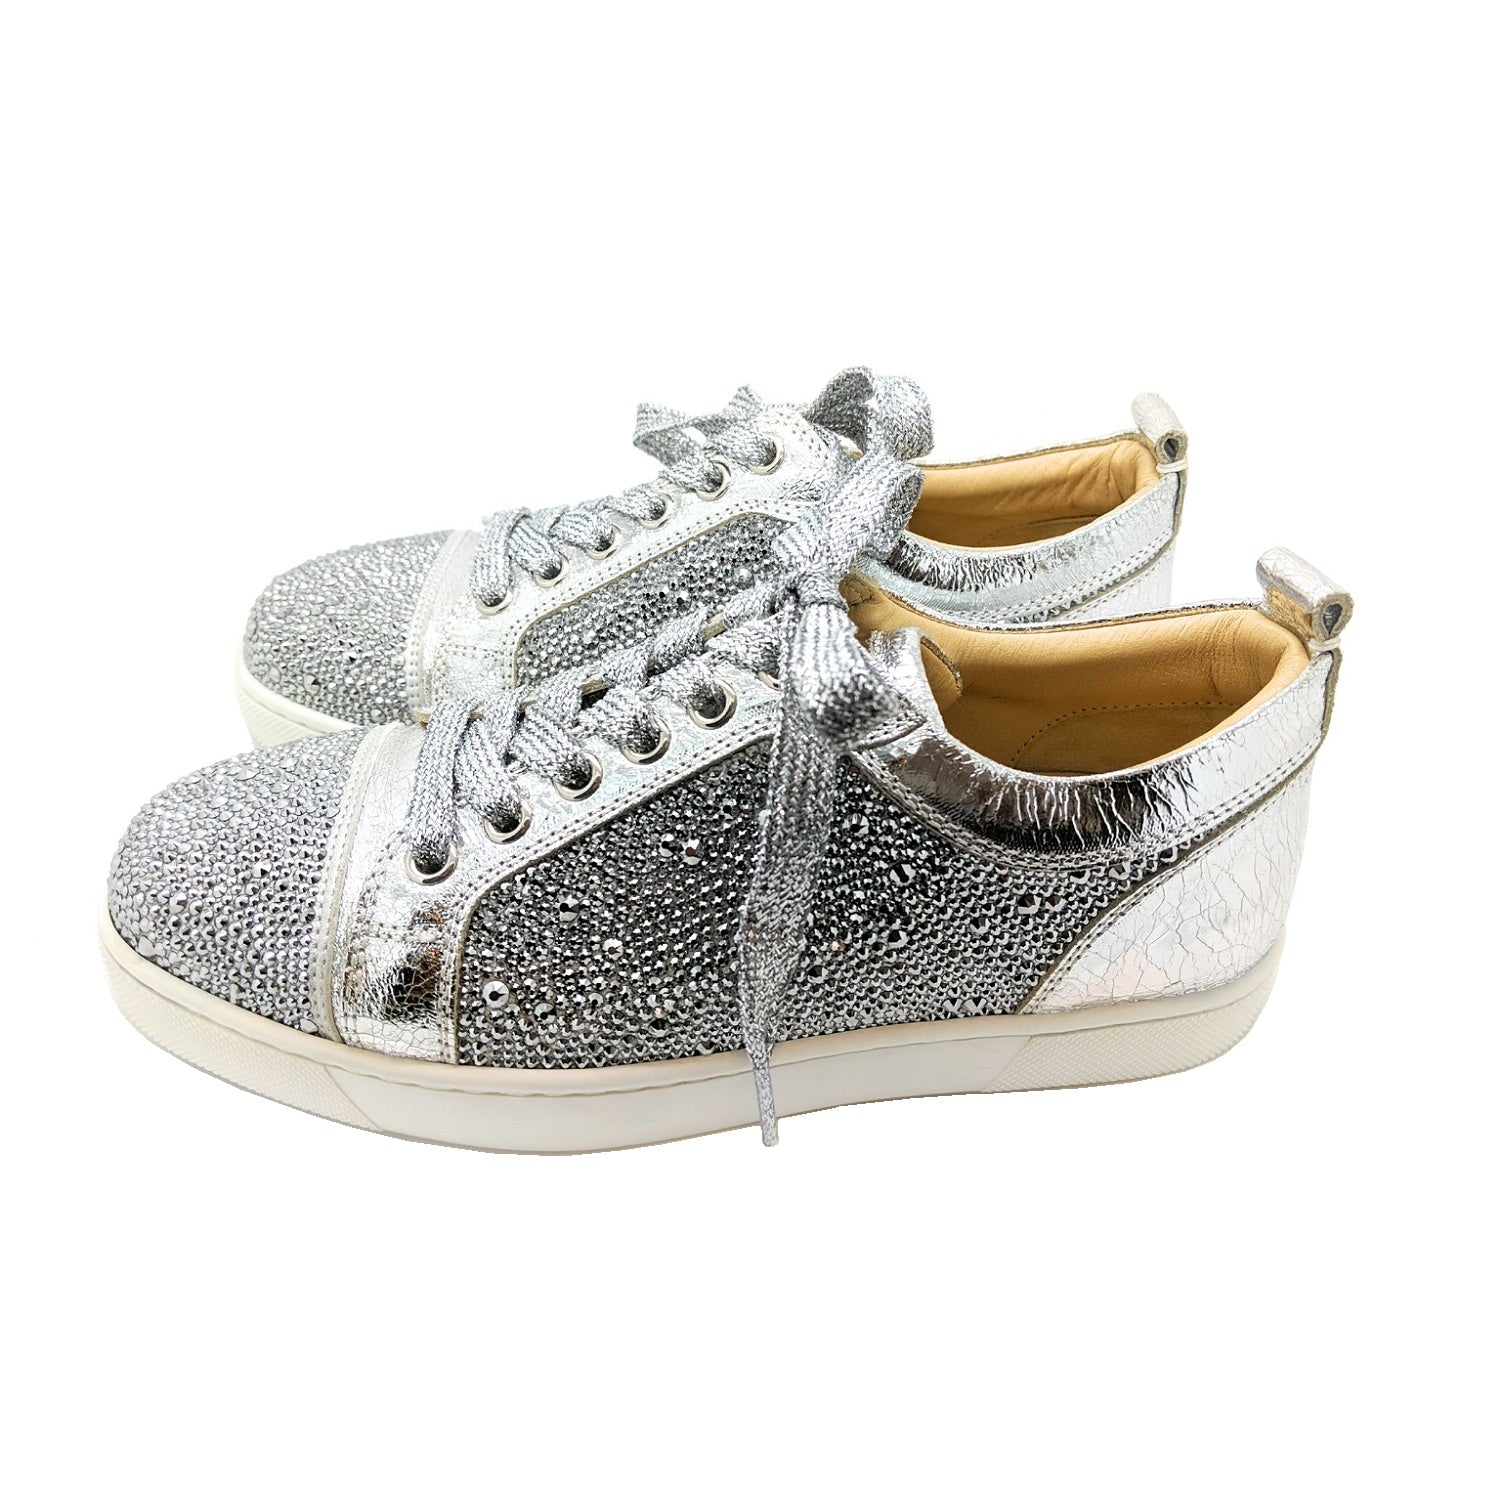 Christian Louboutin Auth LOUIS FLAT STRASS Sneakers Shoes 40.5 New